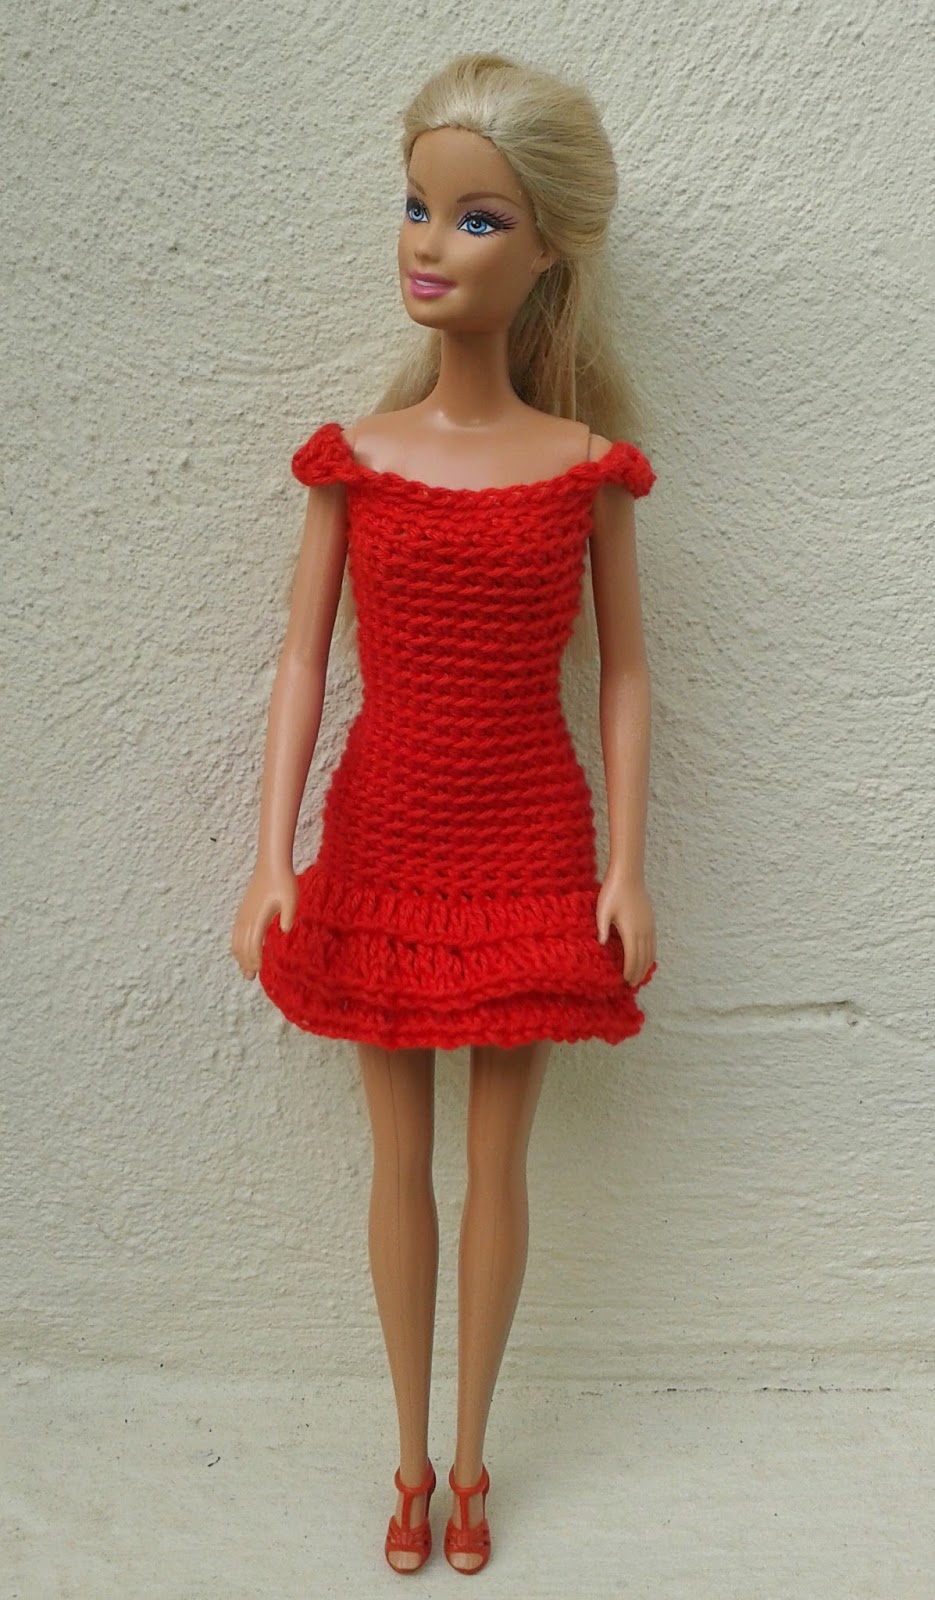 Linmary Knits Barbie en robes rouges au crochet